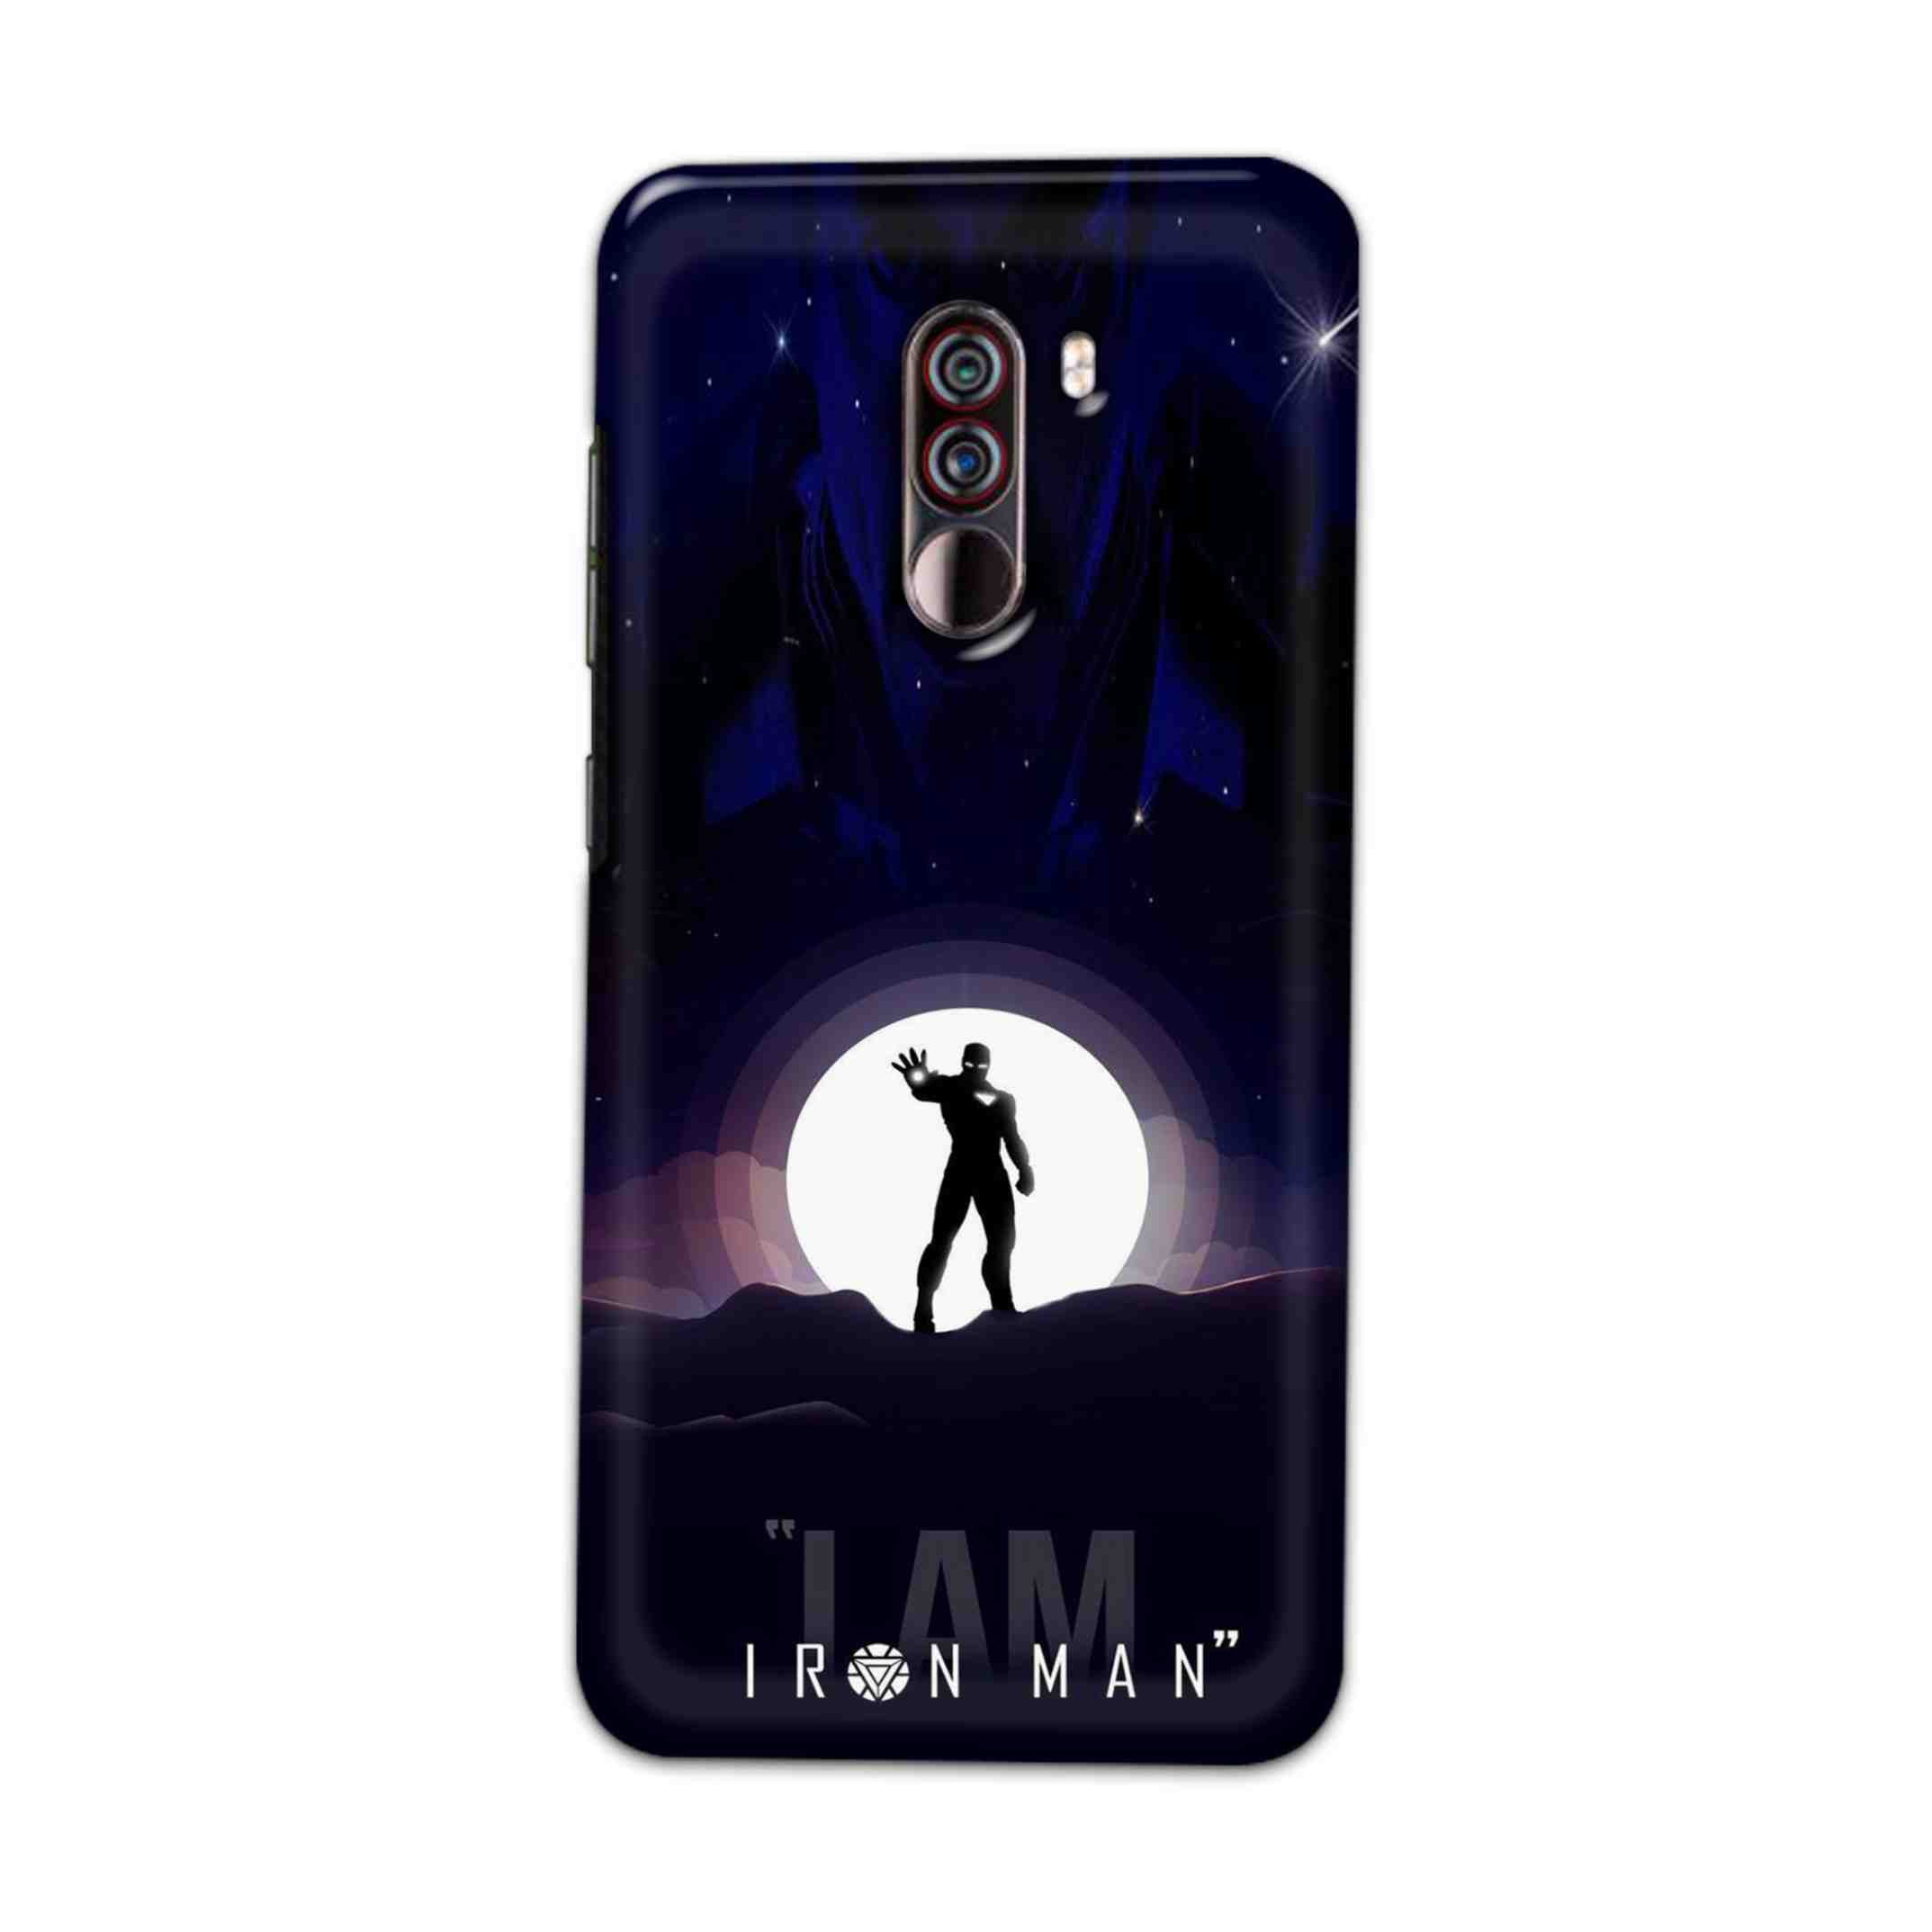 Buy I Am Iron Man Hard Back Mobile Phone Case Cover For Xiaomi Pocophone F1 Online